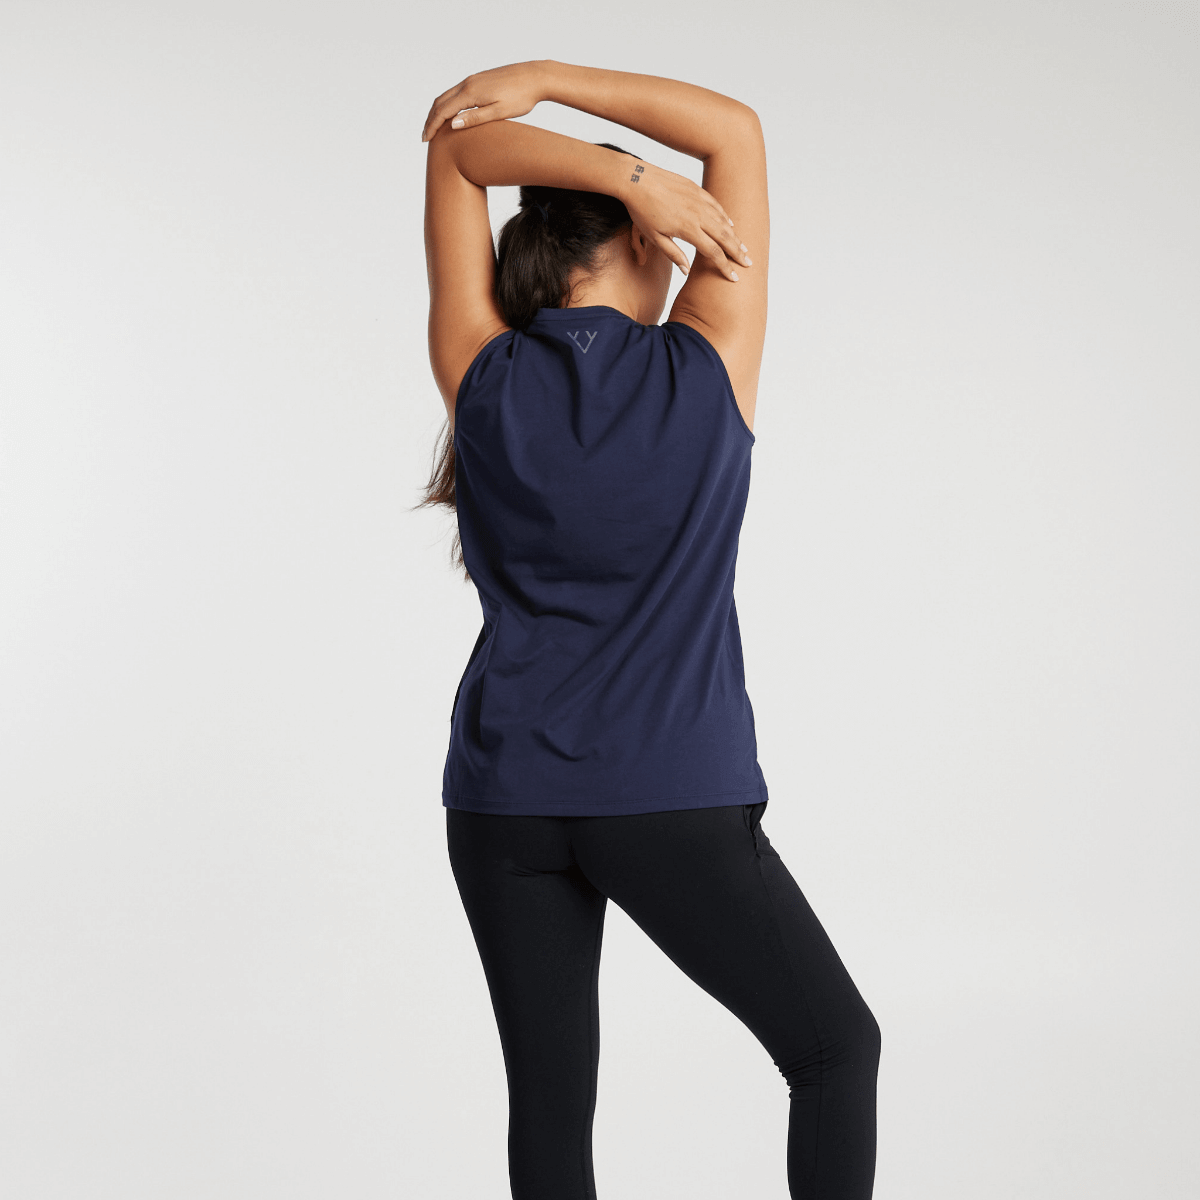 Victoria Stag's Core Muscle Tank in Navy back